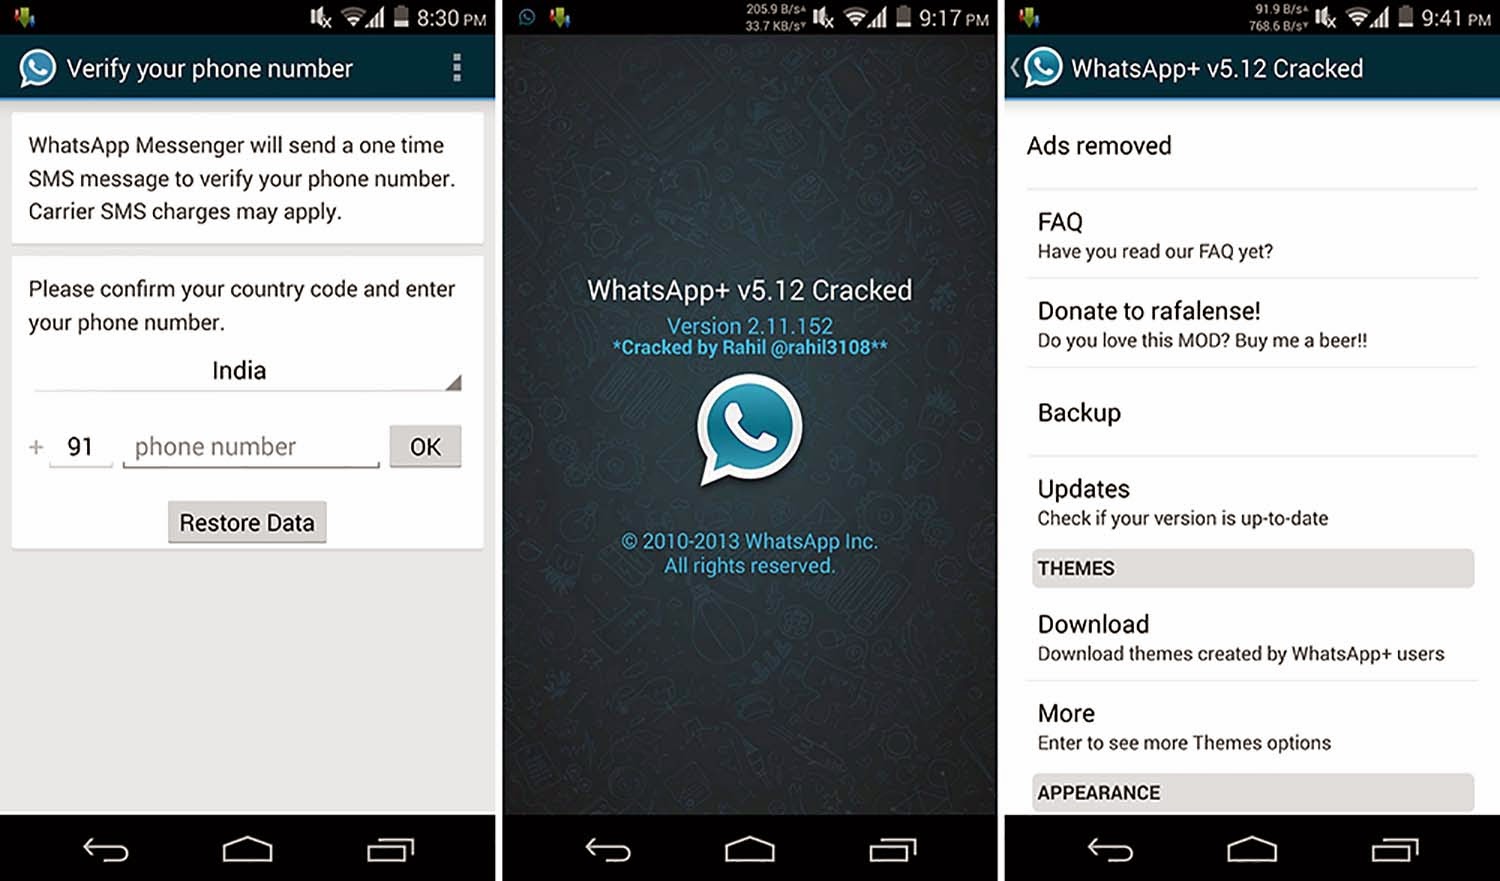 whatsupp+_plus_apk_cracked_root_android